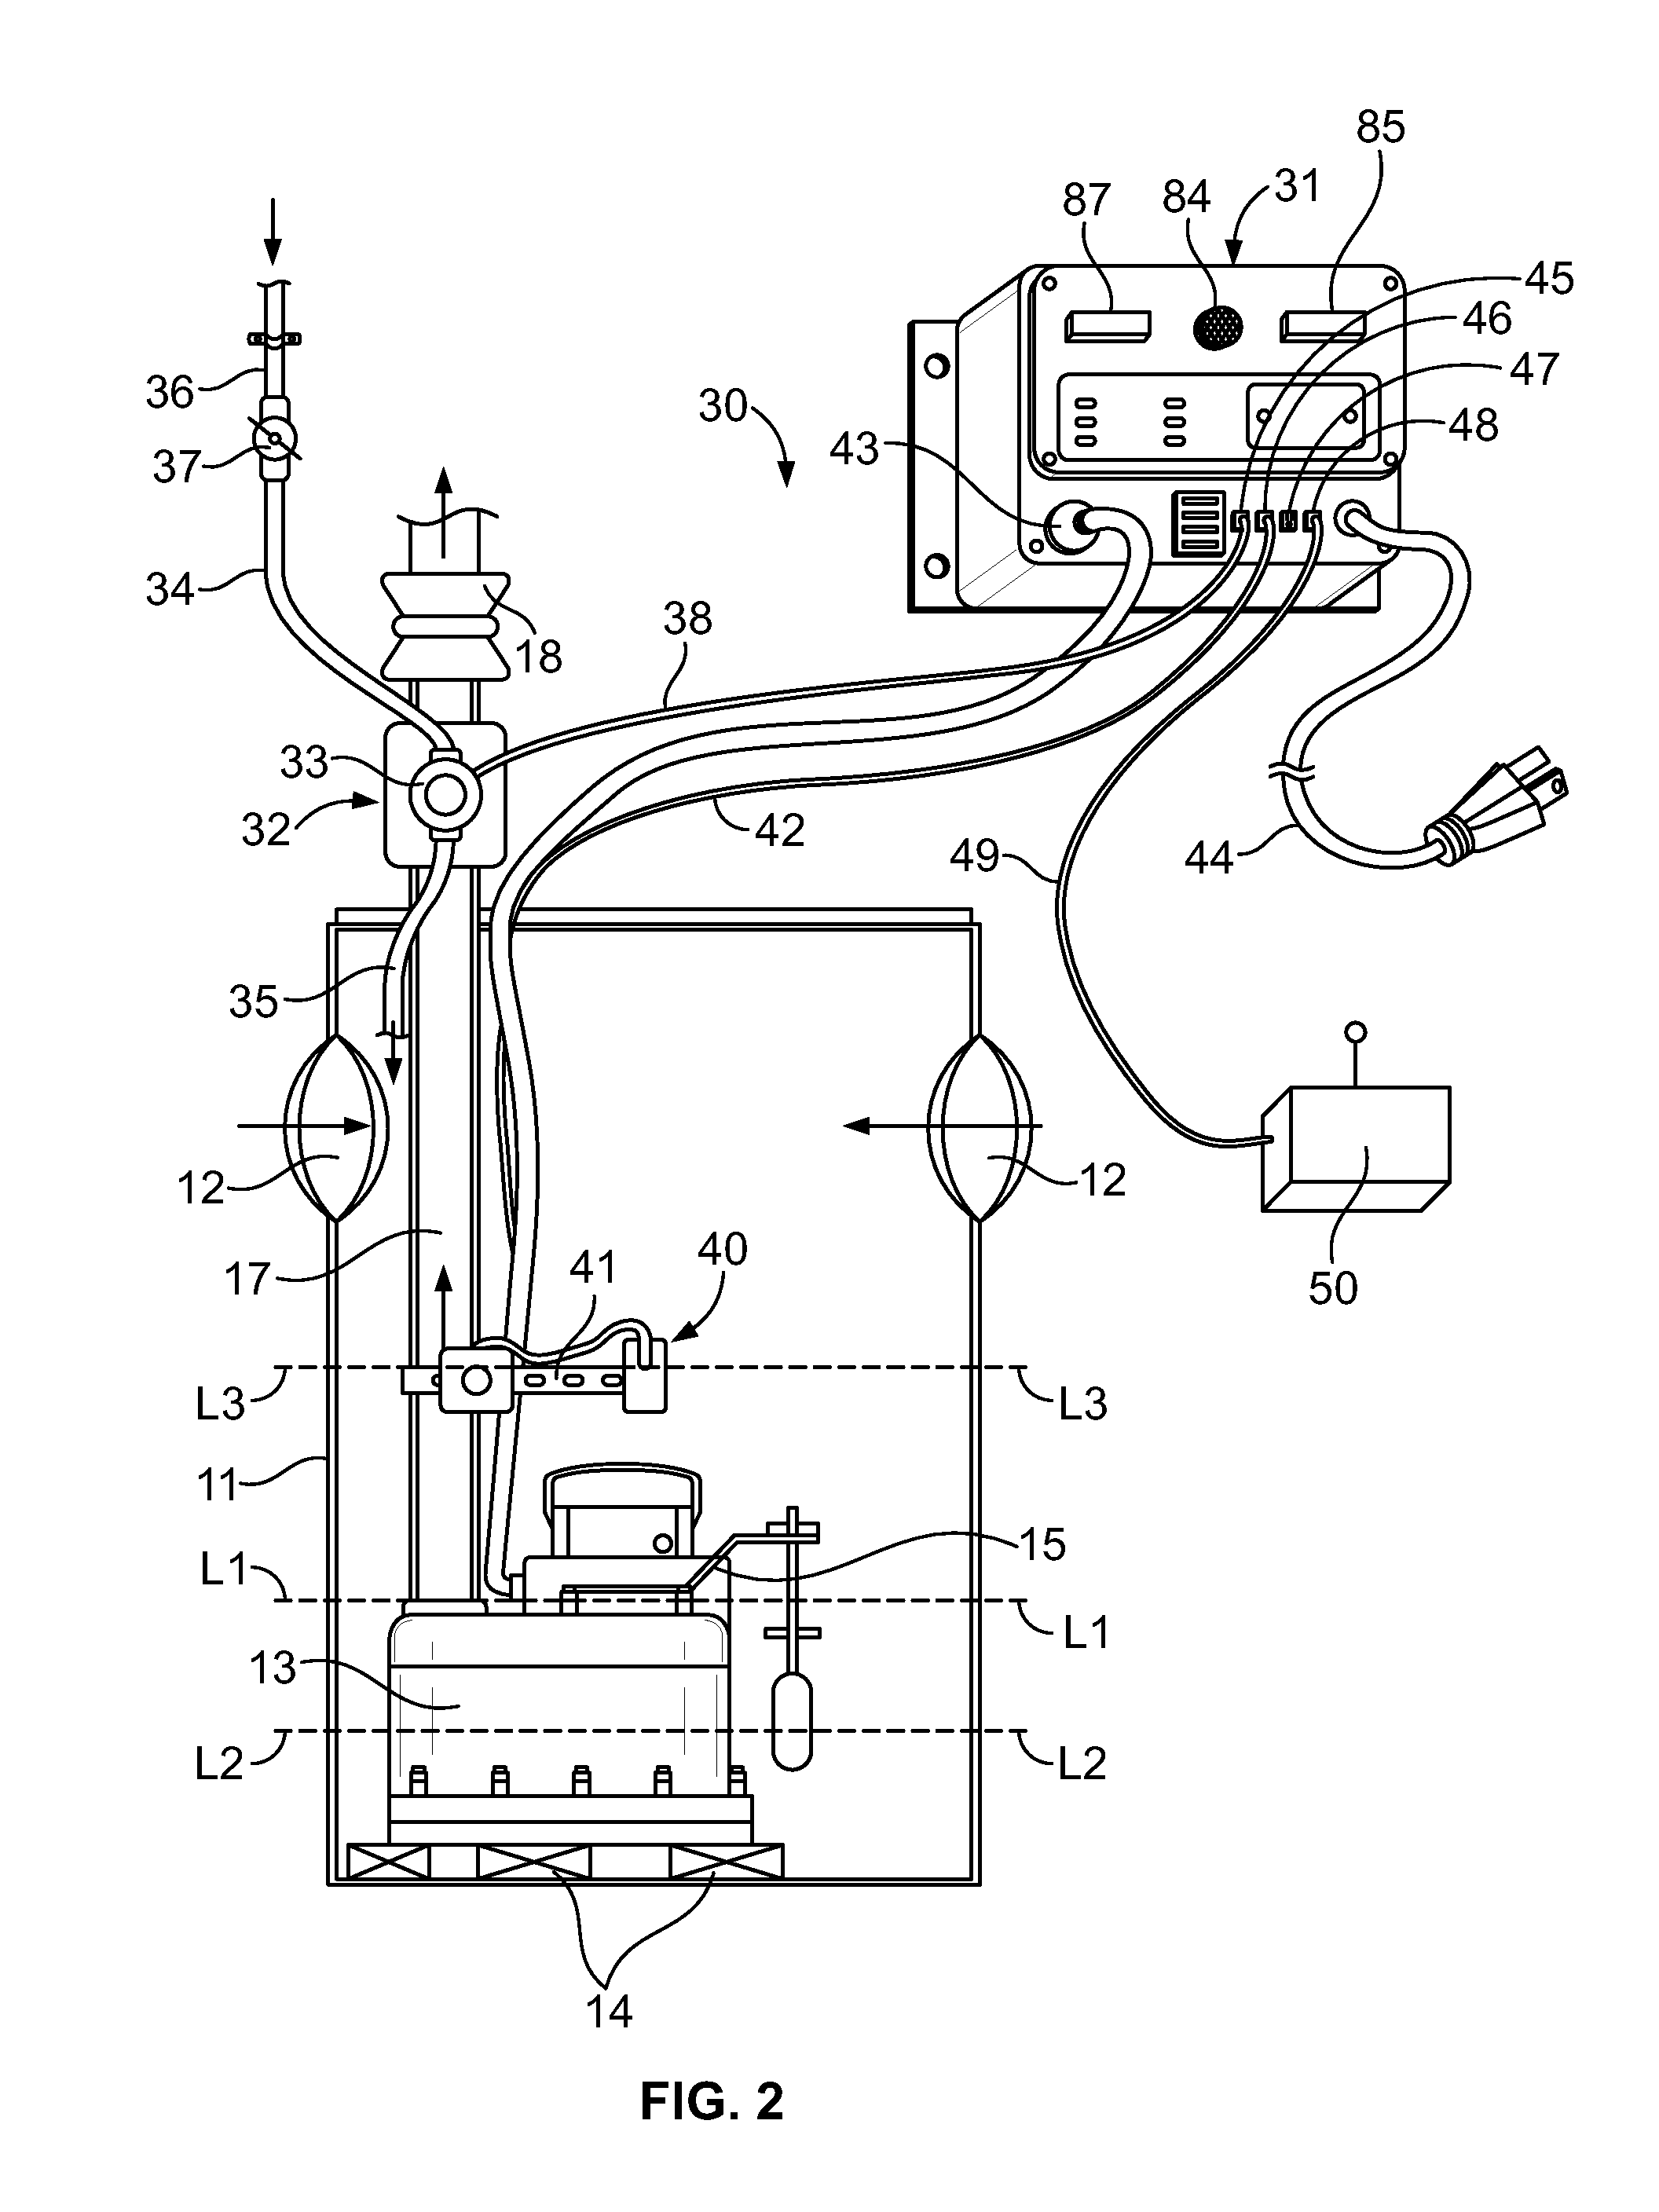 Test and monitoring system for a sump pump installation having a self-monitoring liquid level sensing module